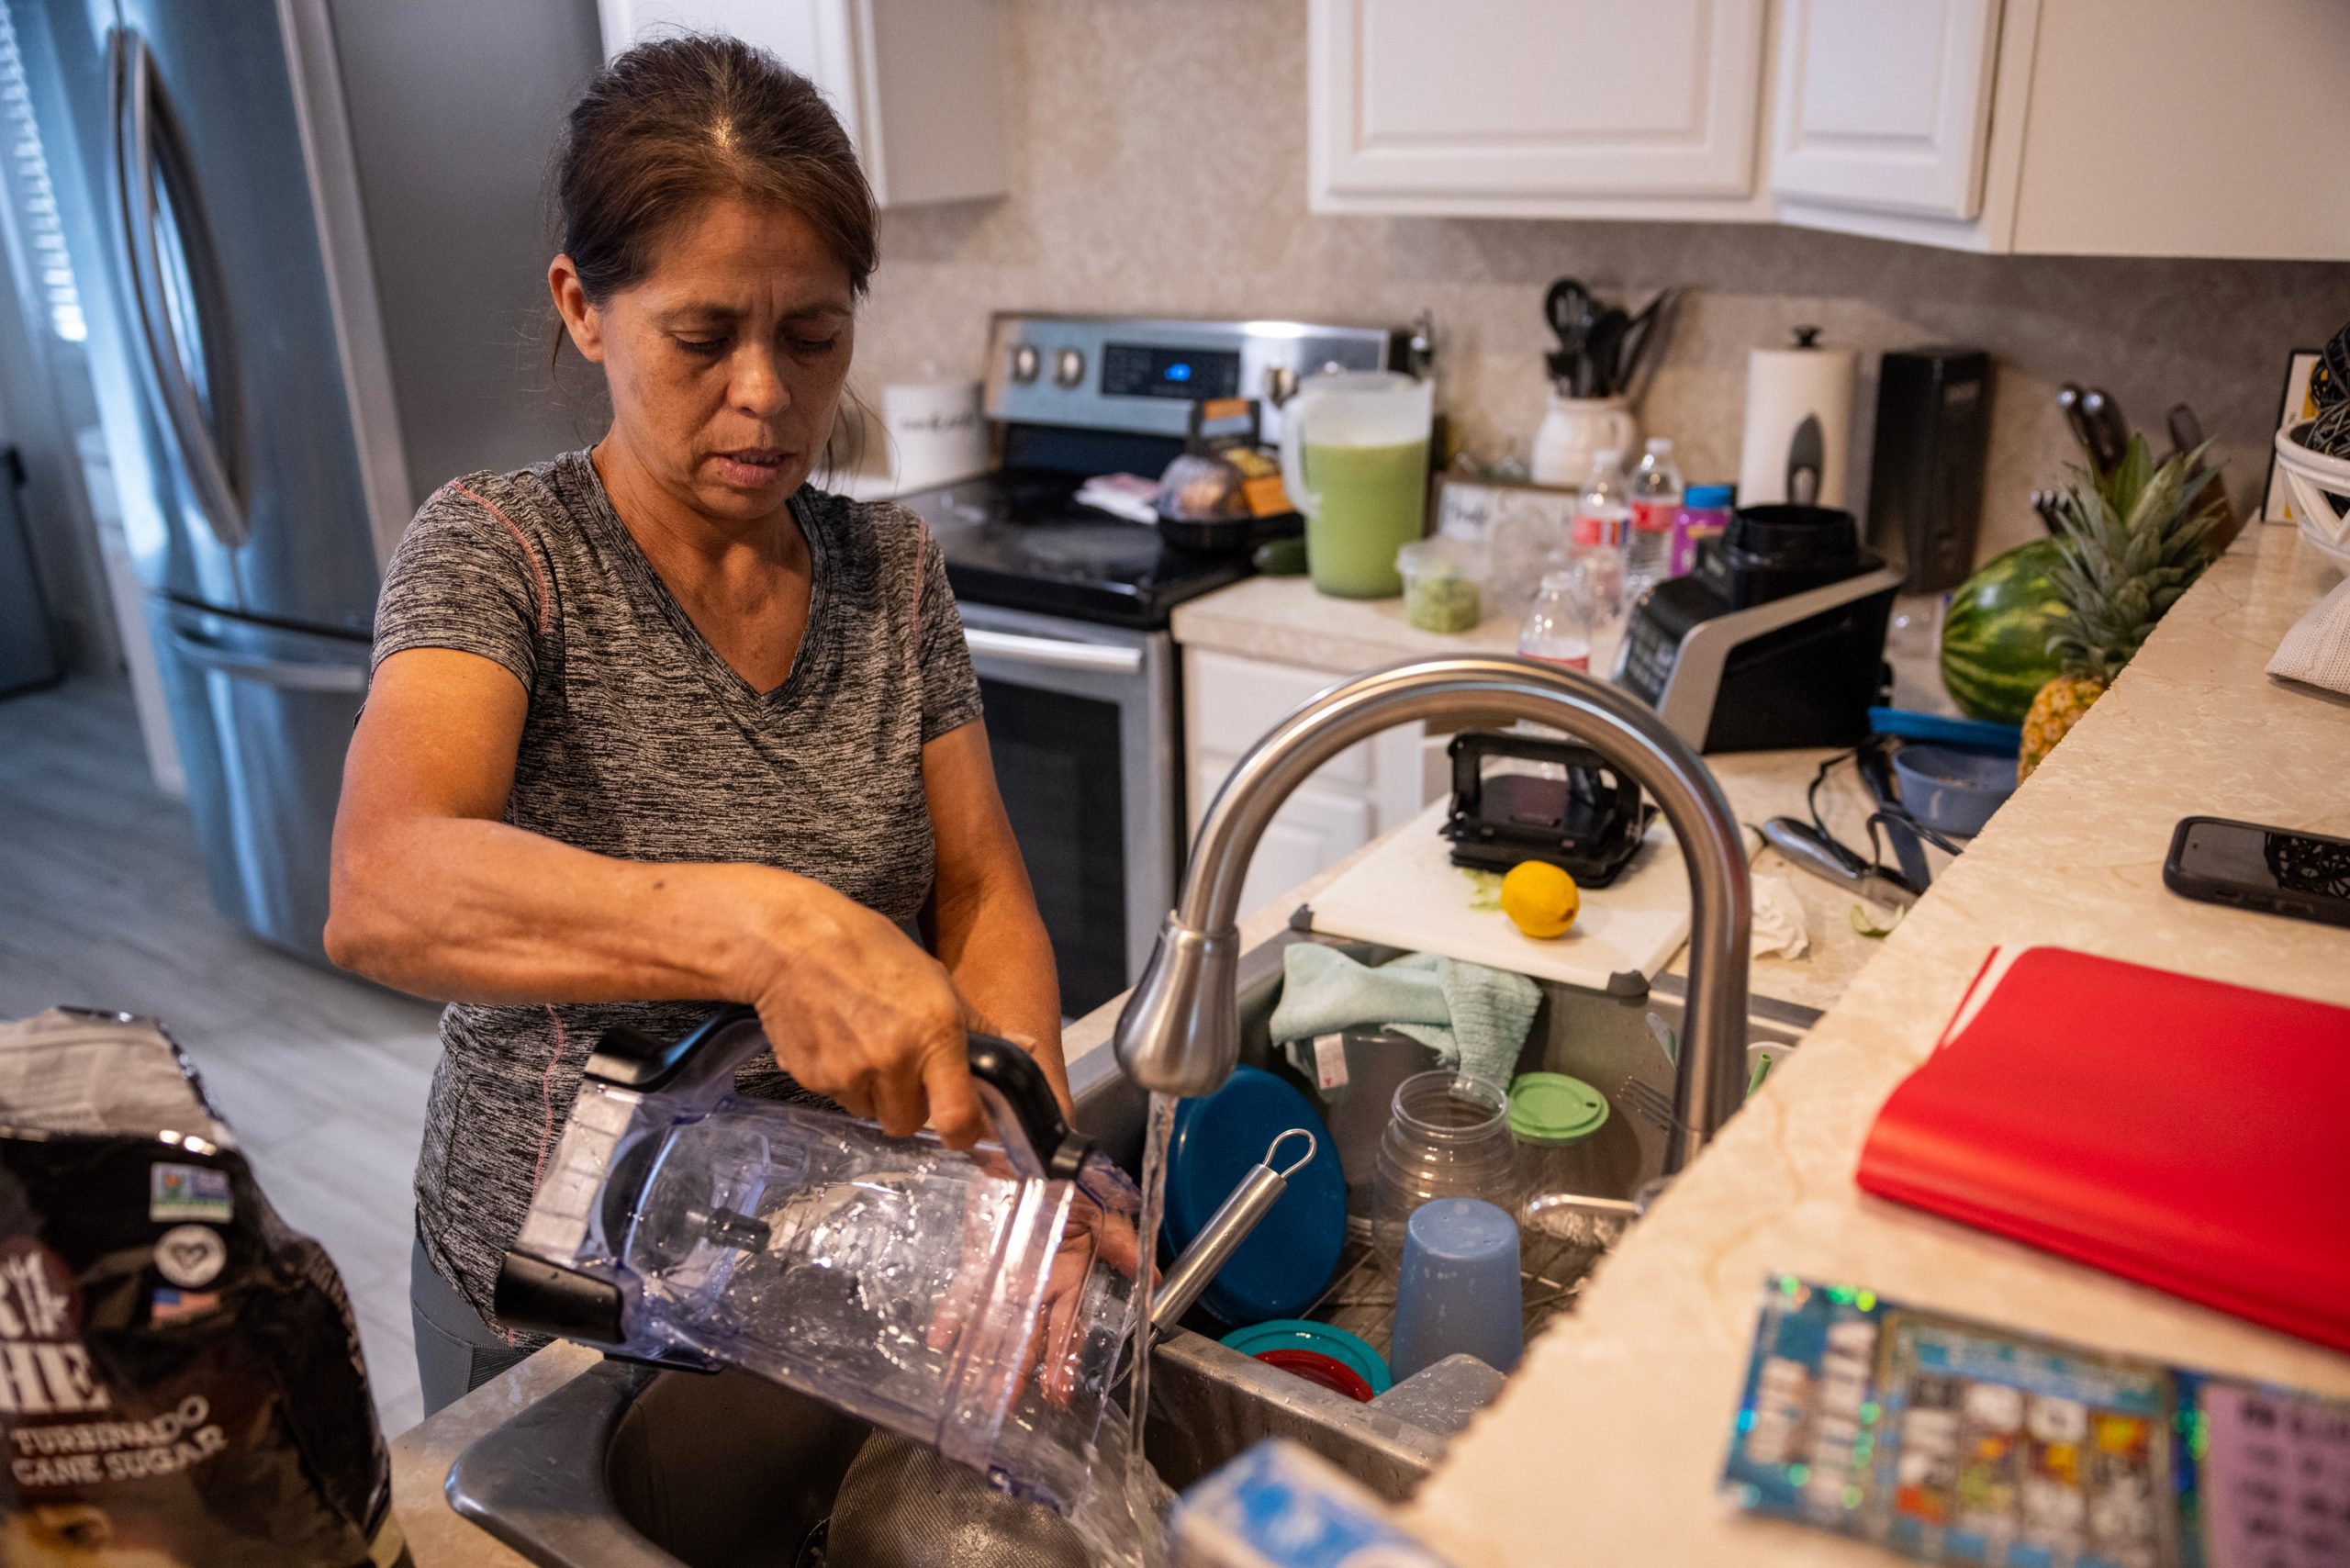 Irma Acosta washes a blender as she cooks dinner at her son’s home, in Fresno, Texas